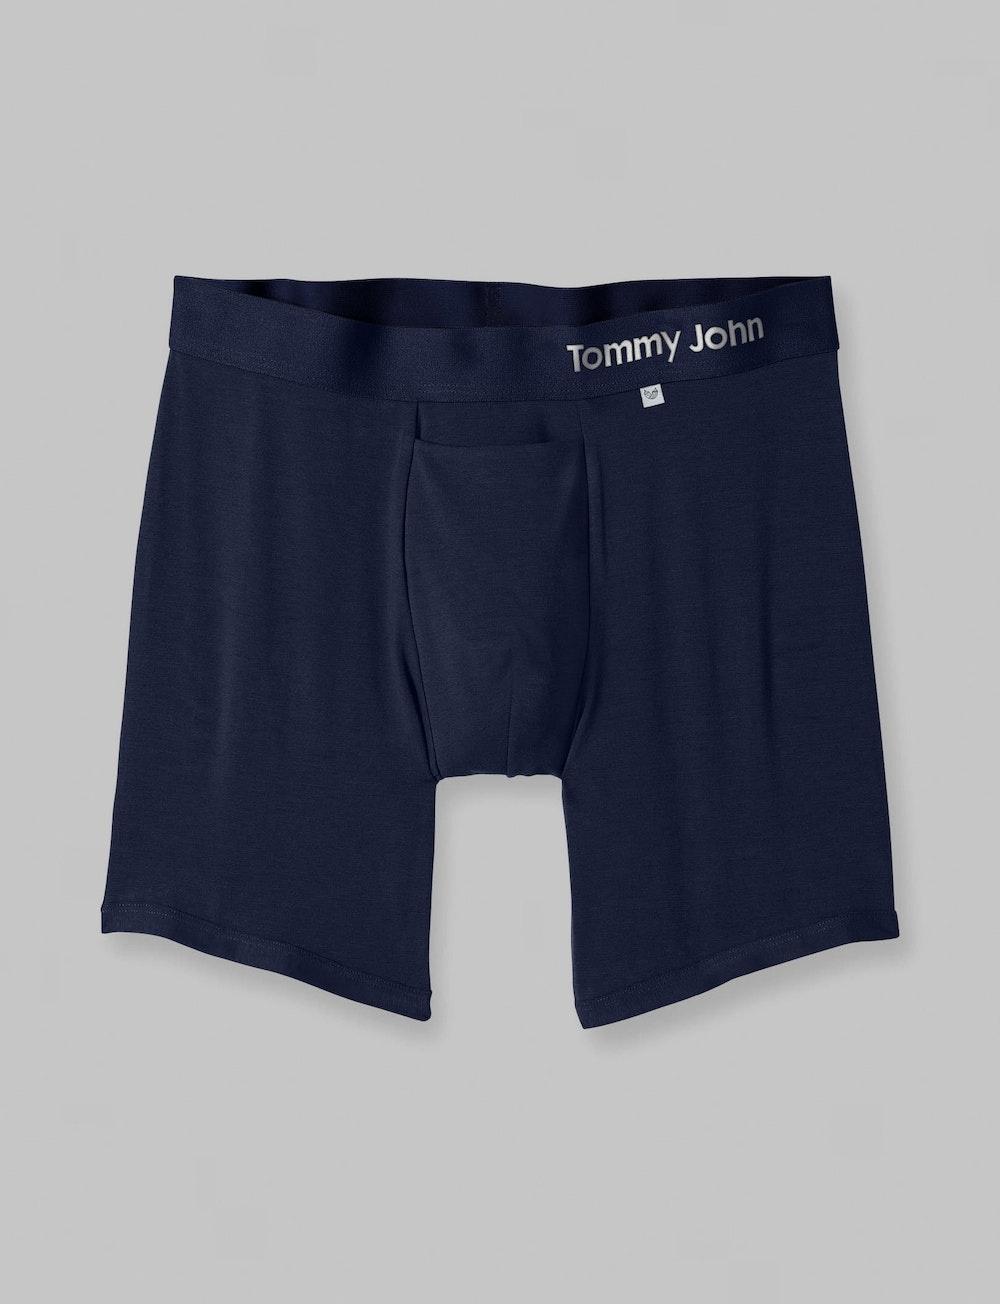 Tommy John Men's Boxer Brief 8” Underwear - Cotton Basics Boxers with  Supportive Contour Pouch